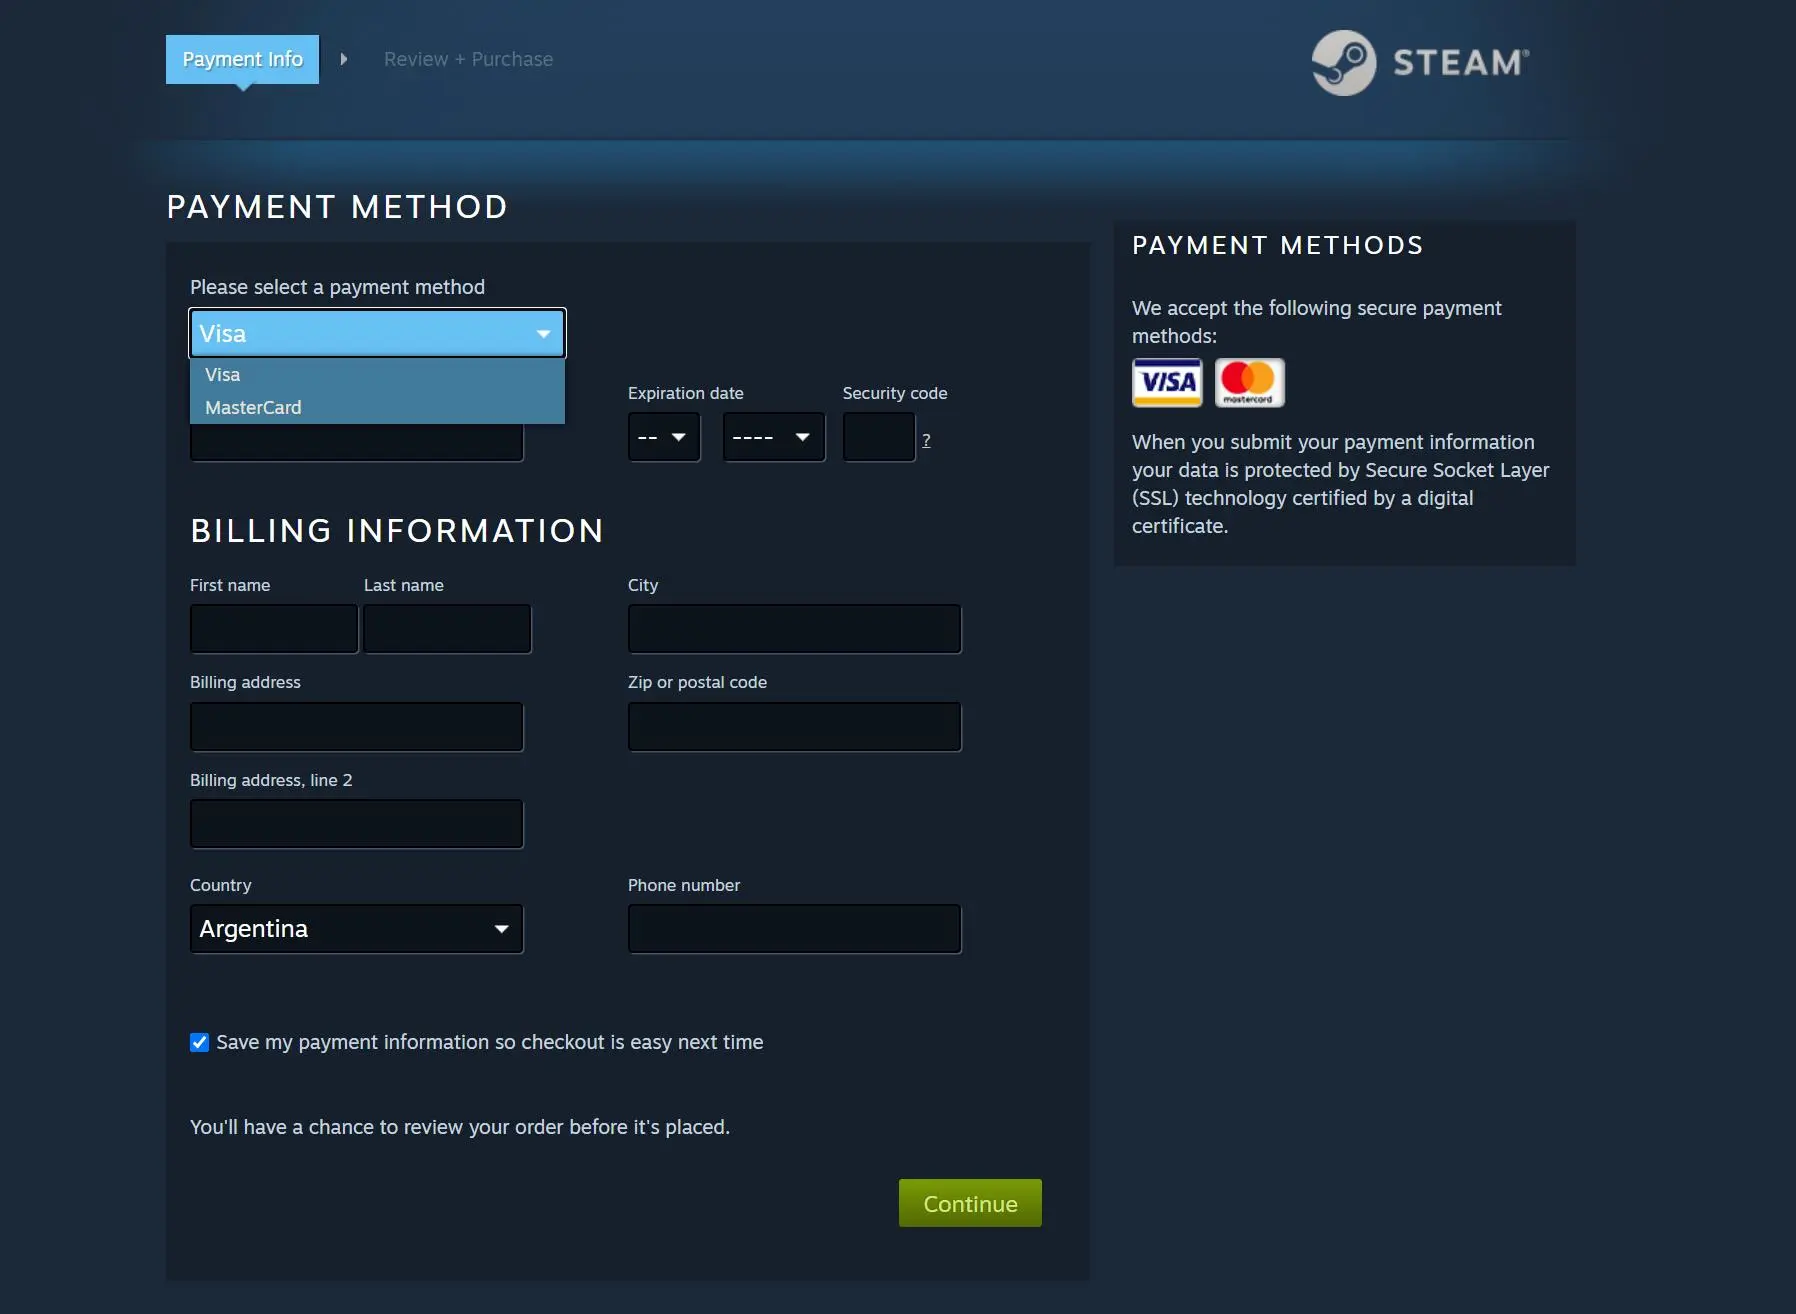 End of STEAM ARGENTINA (currency in DOLLAR), FREE GAME on STEAM, PROMOTION  and UBISOFT being UBISOFT — Eightify